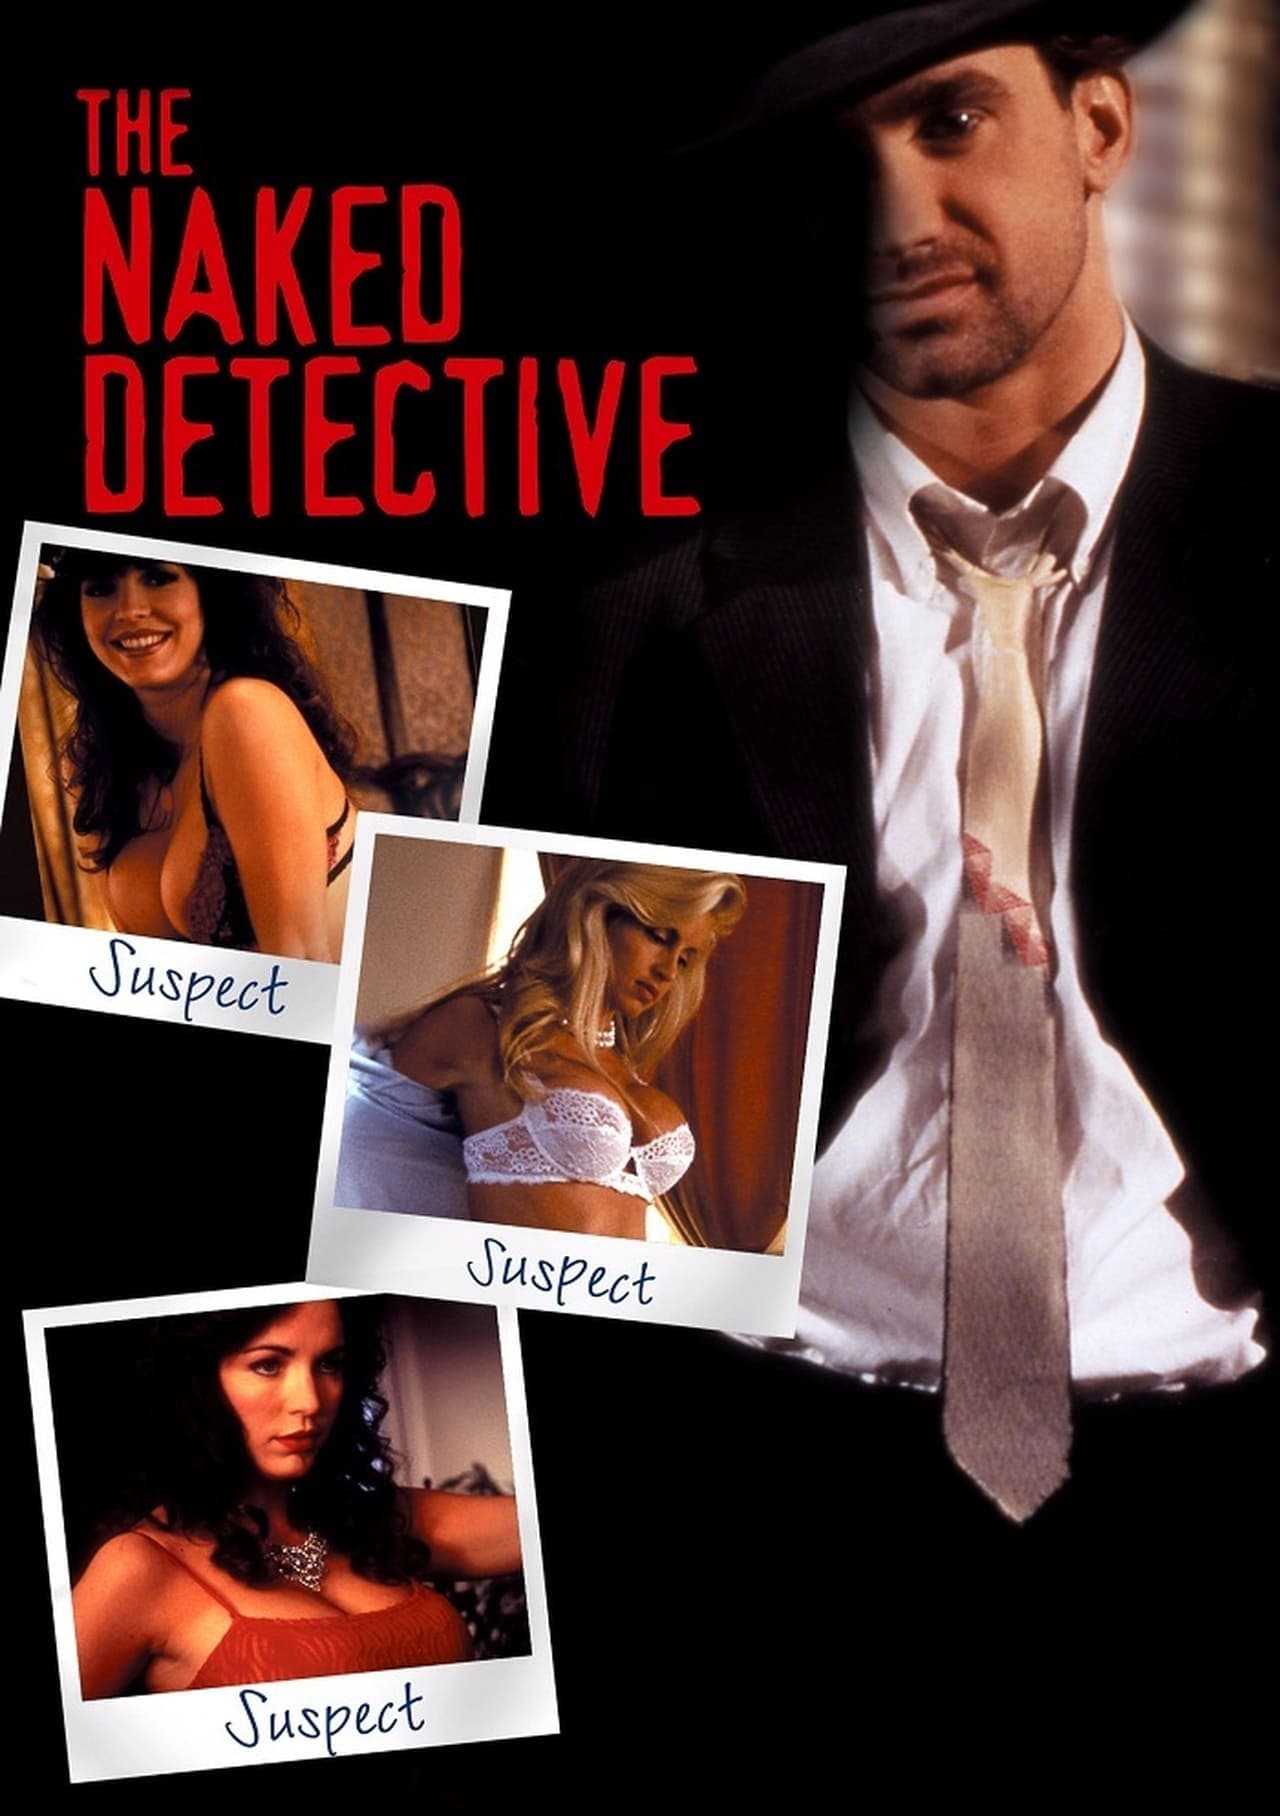 The Naked Detective